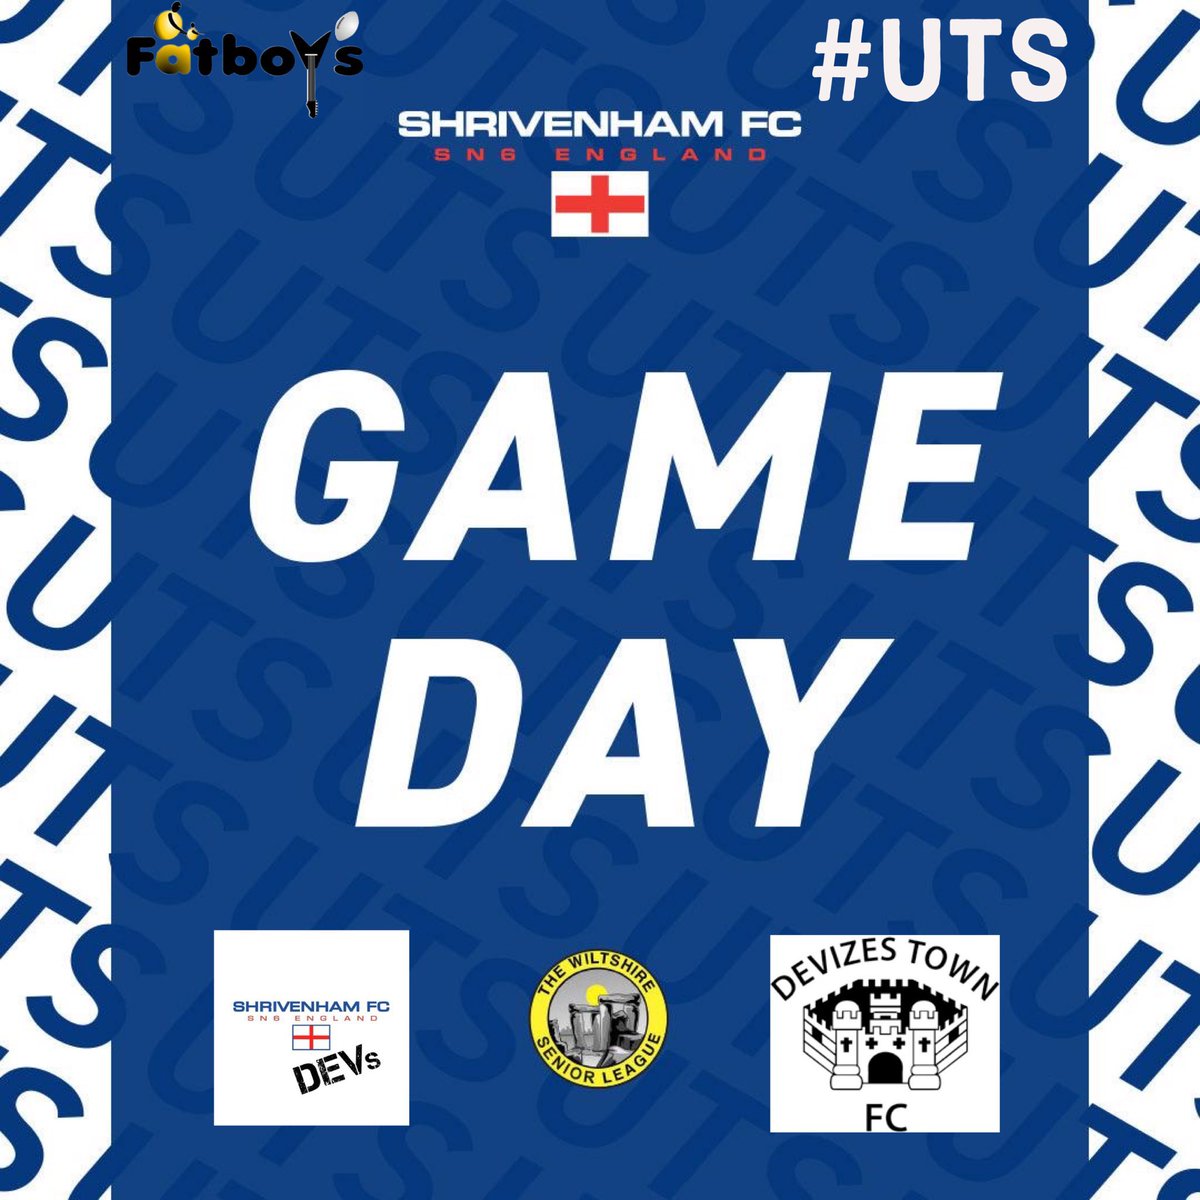 🔵⚪️GAME DAY🔵⚪️

The boys are back in action today as welcome @DevReservesFC to the Ian Richardson Ground 🔵⚪️

🆚 @DevReservesFC 
🏆 Wiltshire Senior League - Division 1 
⌚️ 14:15
📍RECREATION GROUND, SHRIVENHAM, SWINDON,  SN6 8BJ

@WiltsLeague @OxOnFootball @YSswindon